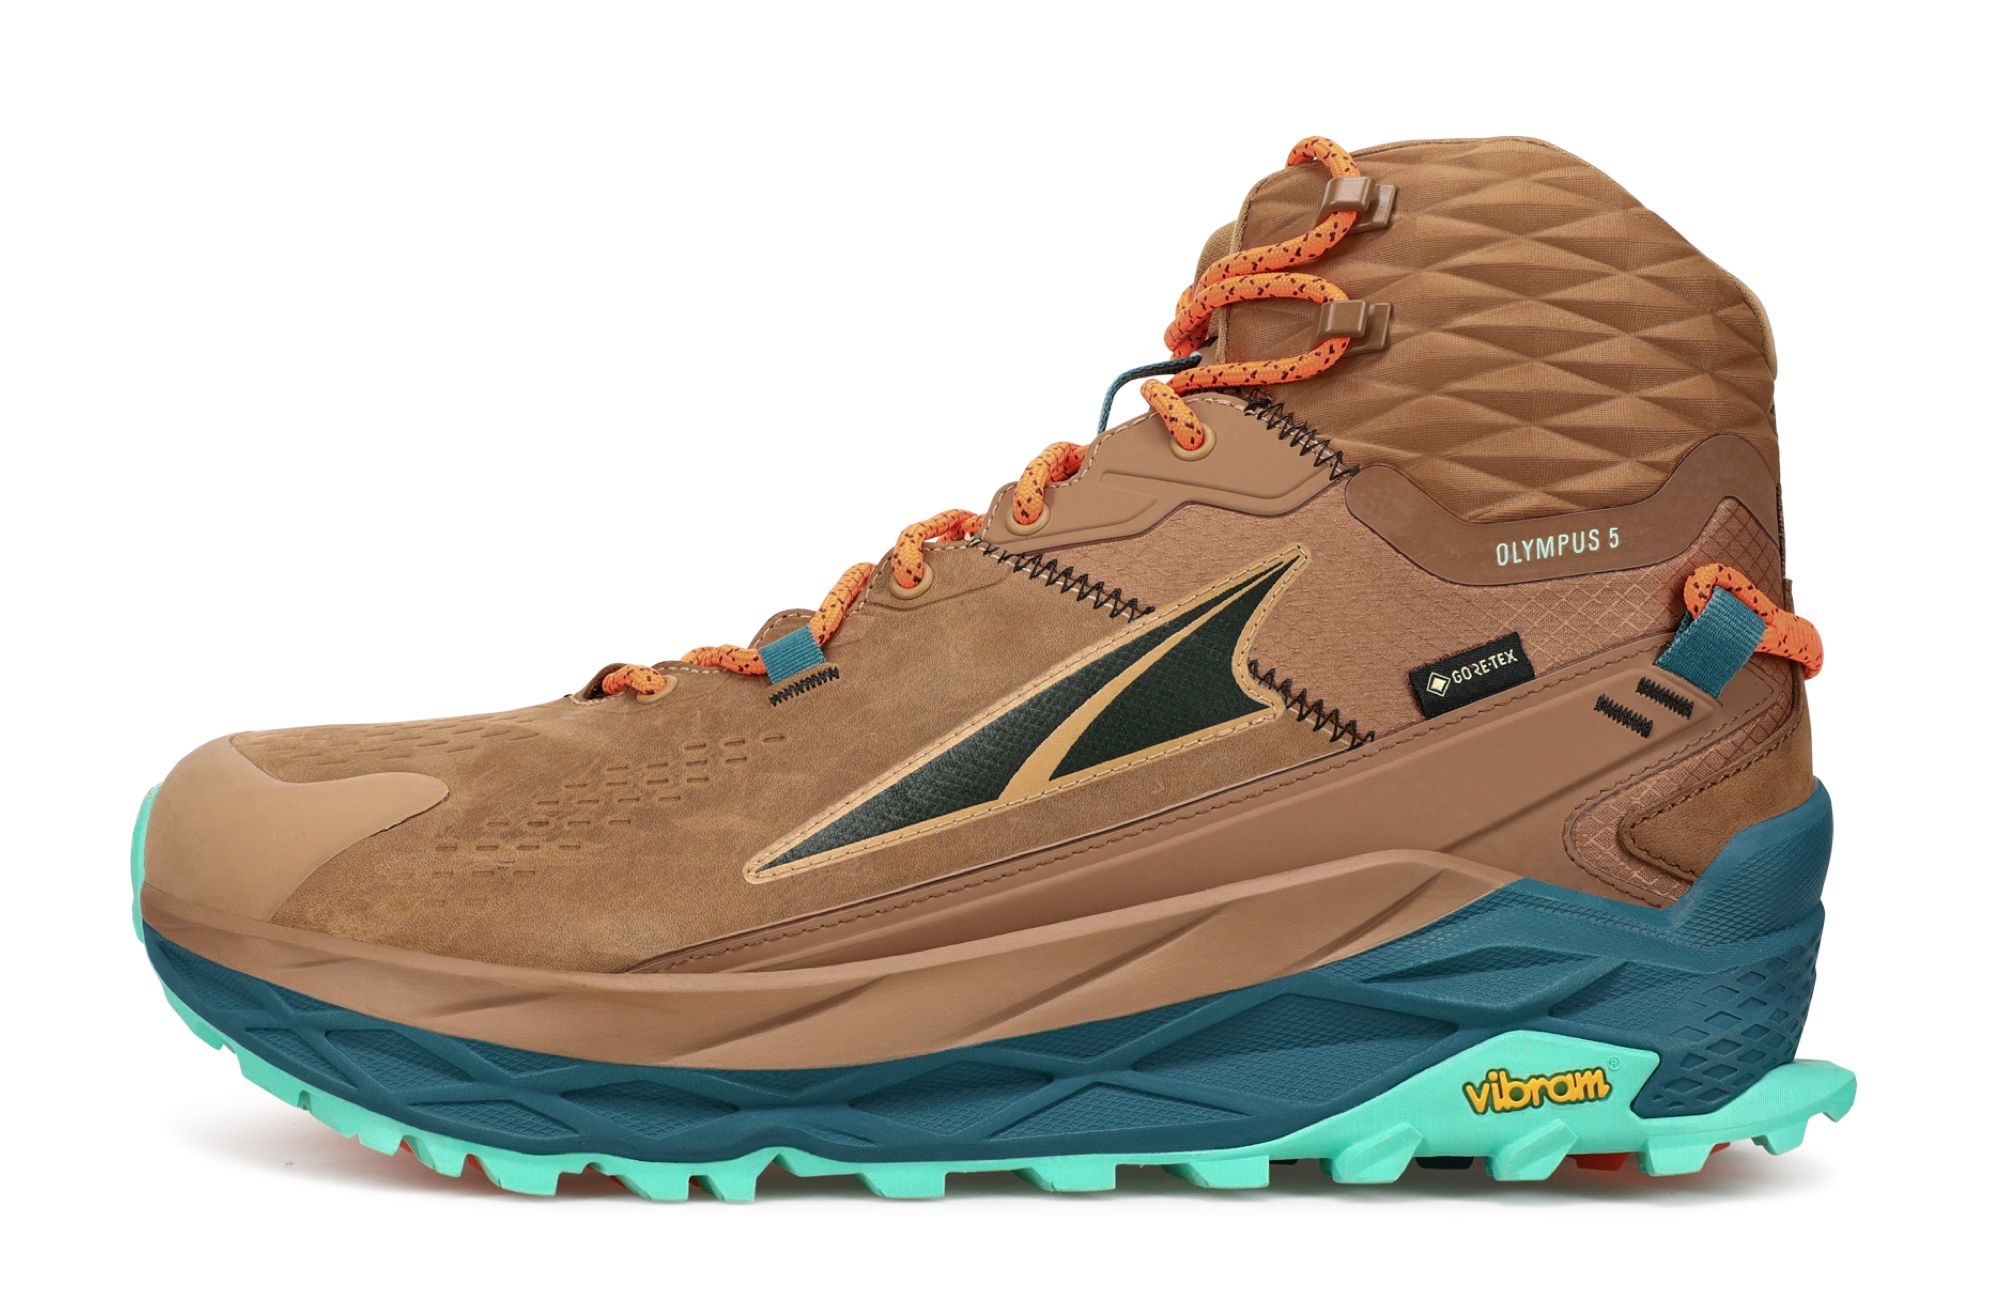 The New Olympus 5 Hike Mid GTX For All-Weather Hiking | Altra Running